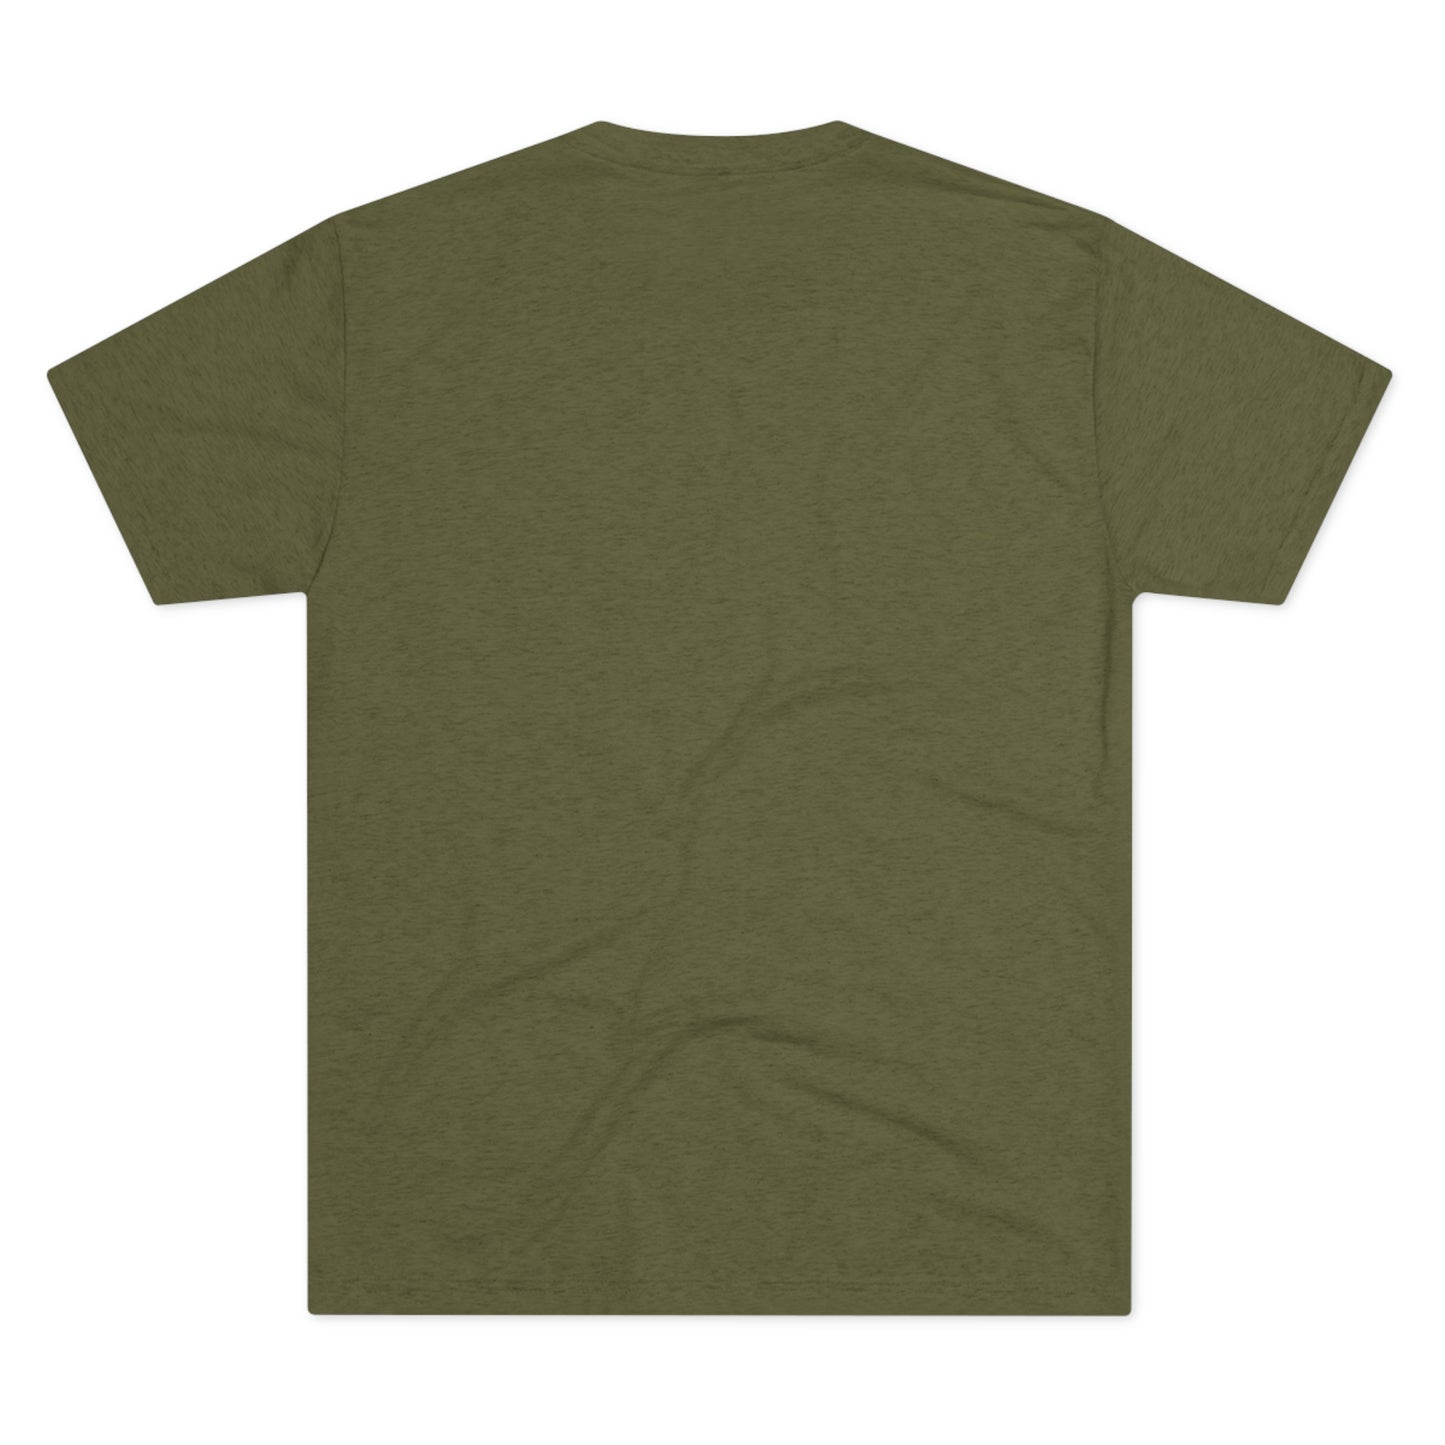 Front Line Gear & Outfitters tee